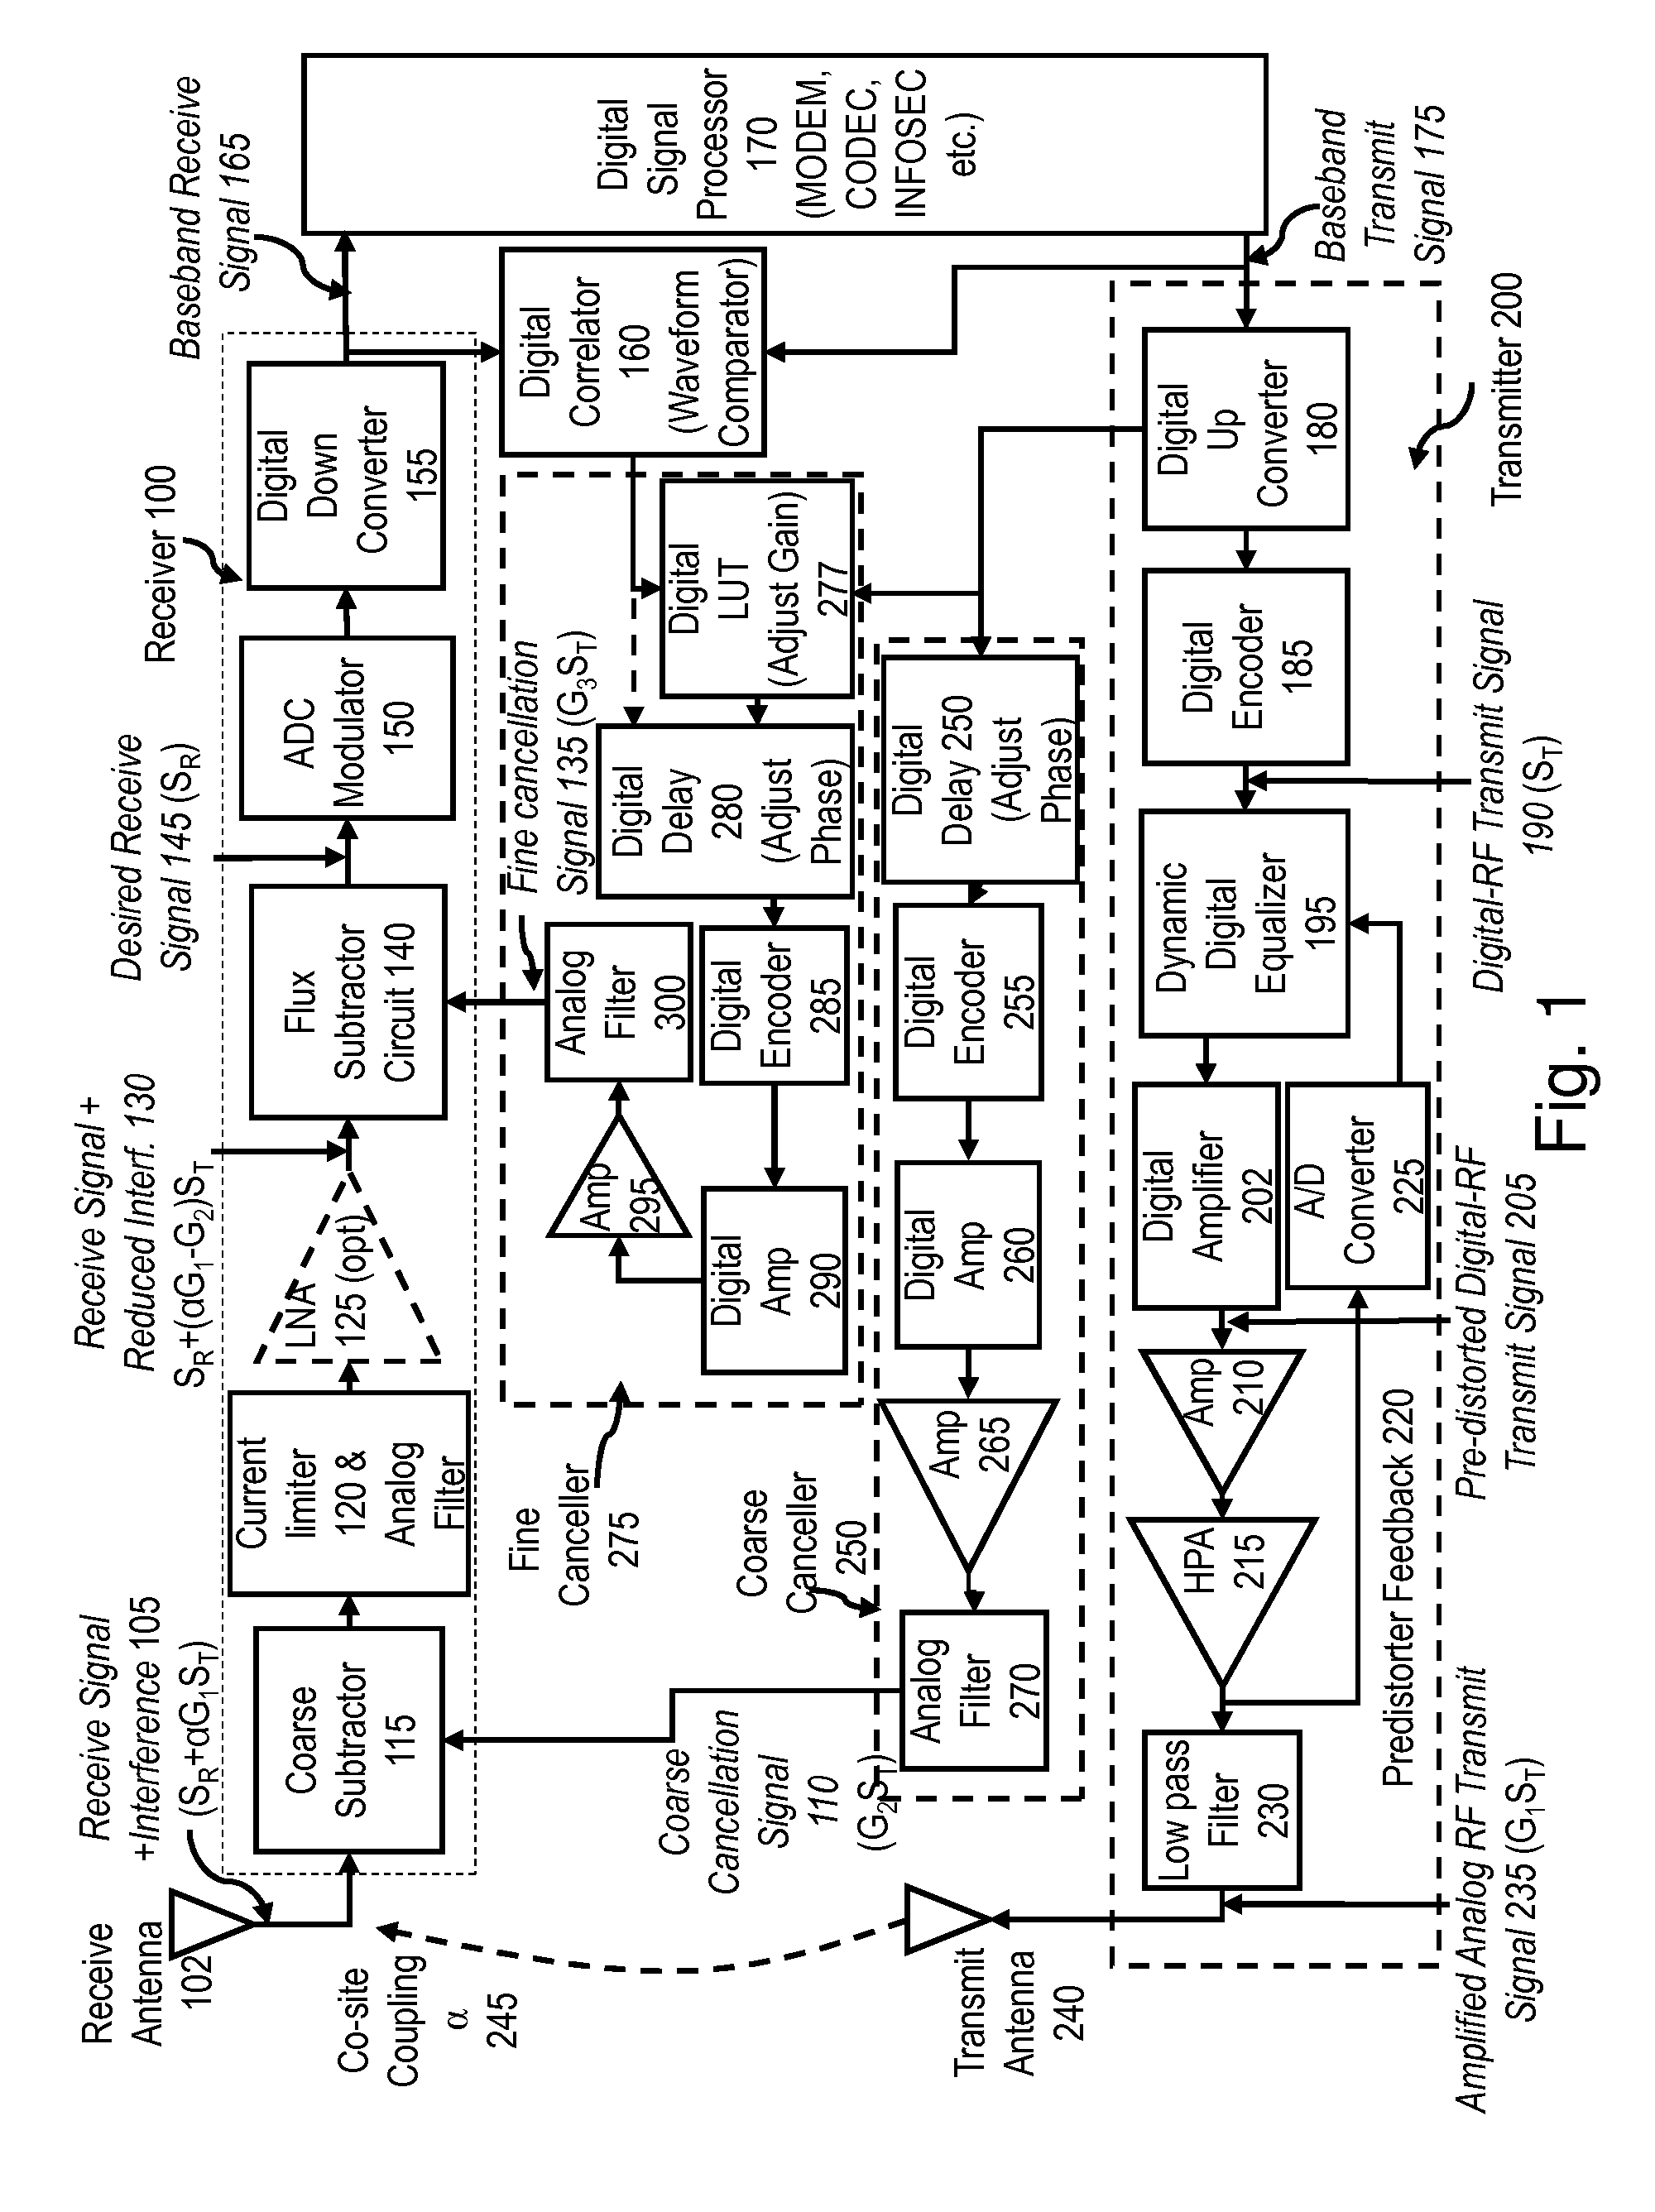 Two stage radio frequency interference cancellation system and method